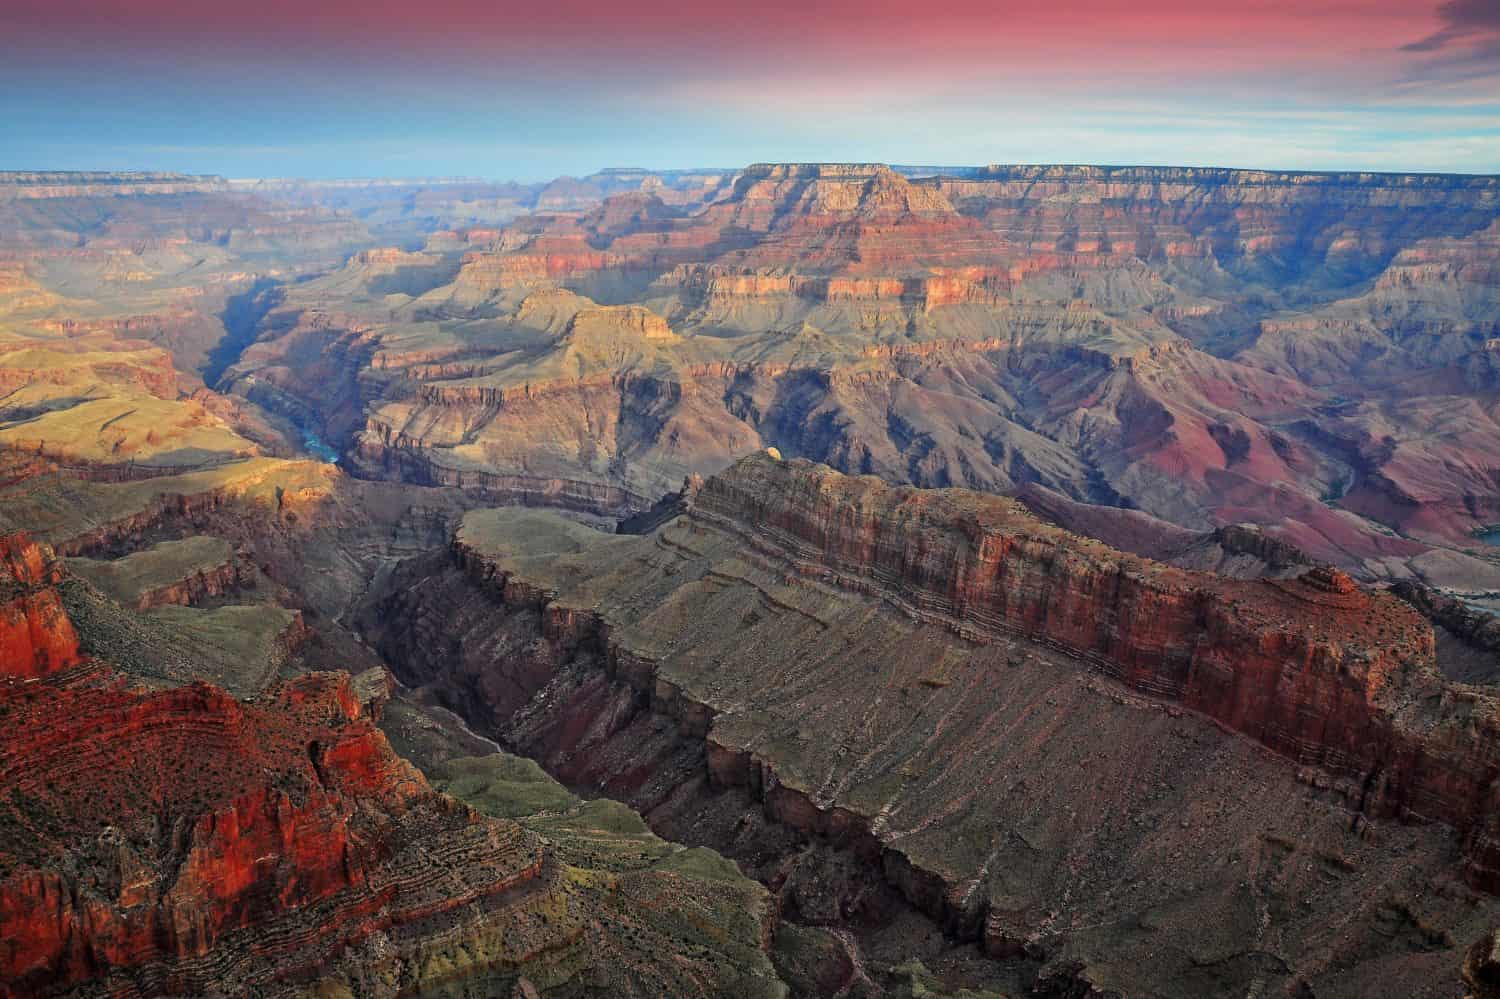 Scenic Drives and Viewpoints by Motorized Vehicle - Grand Canyon